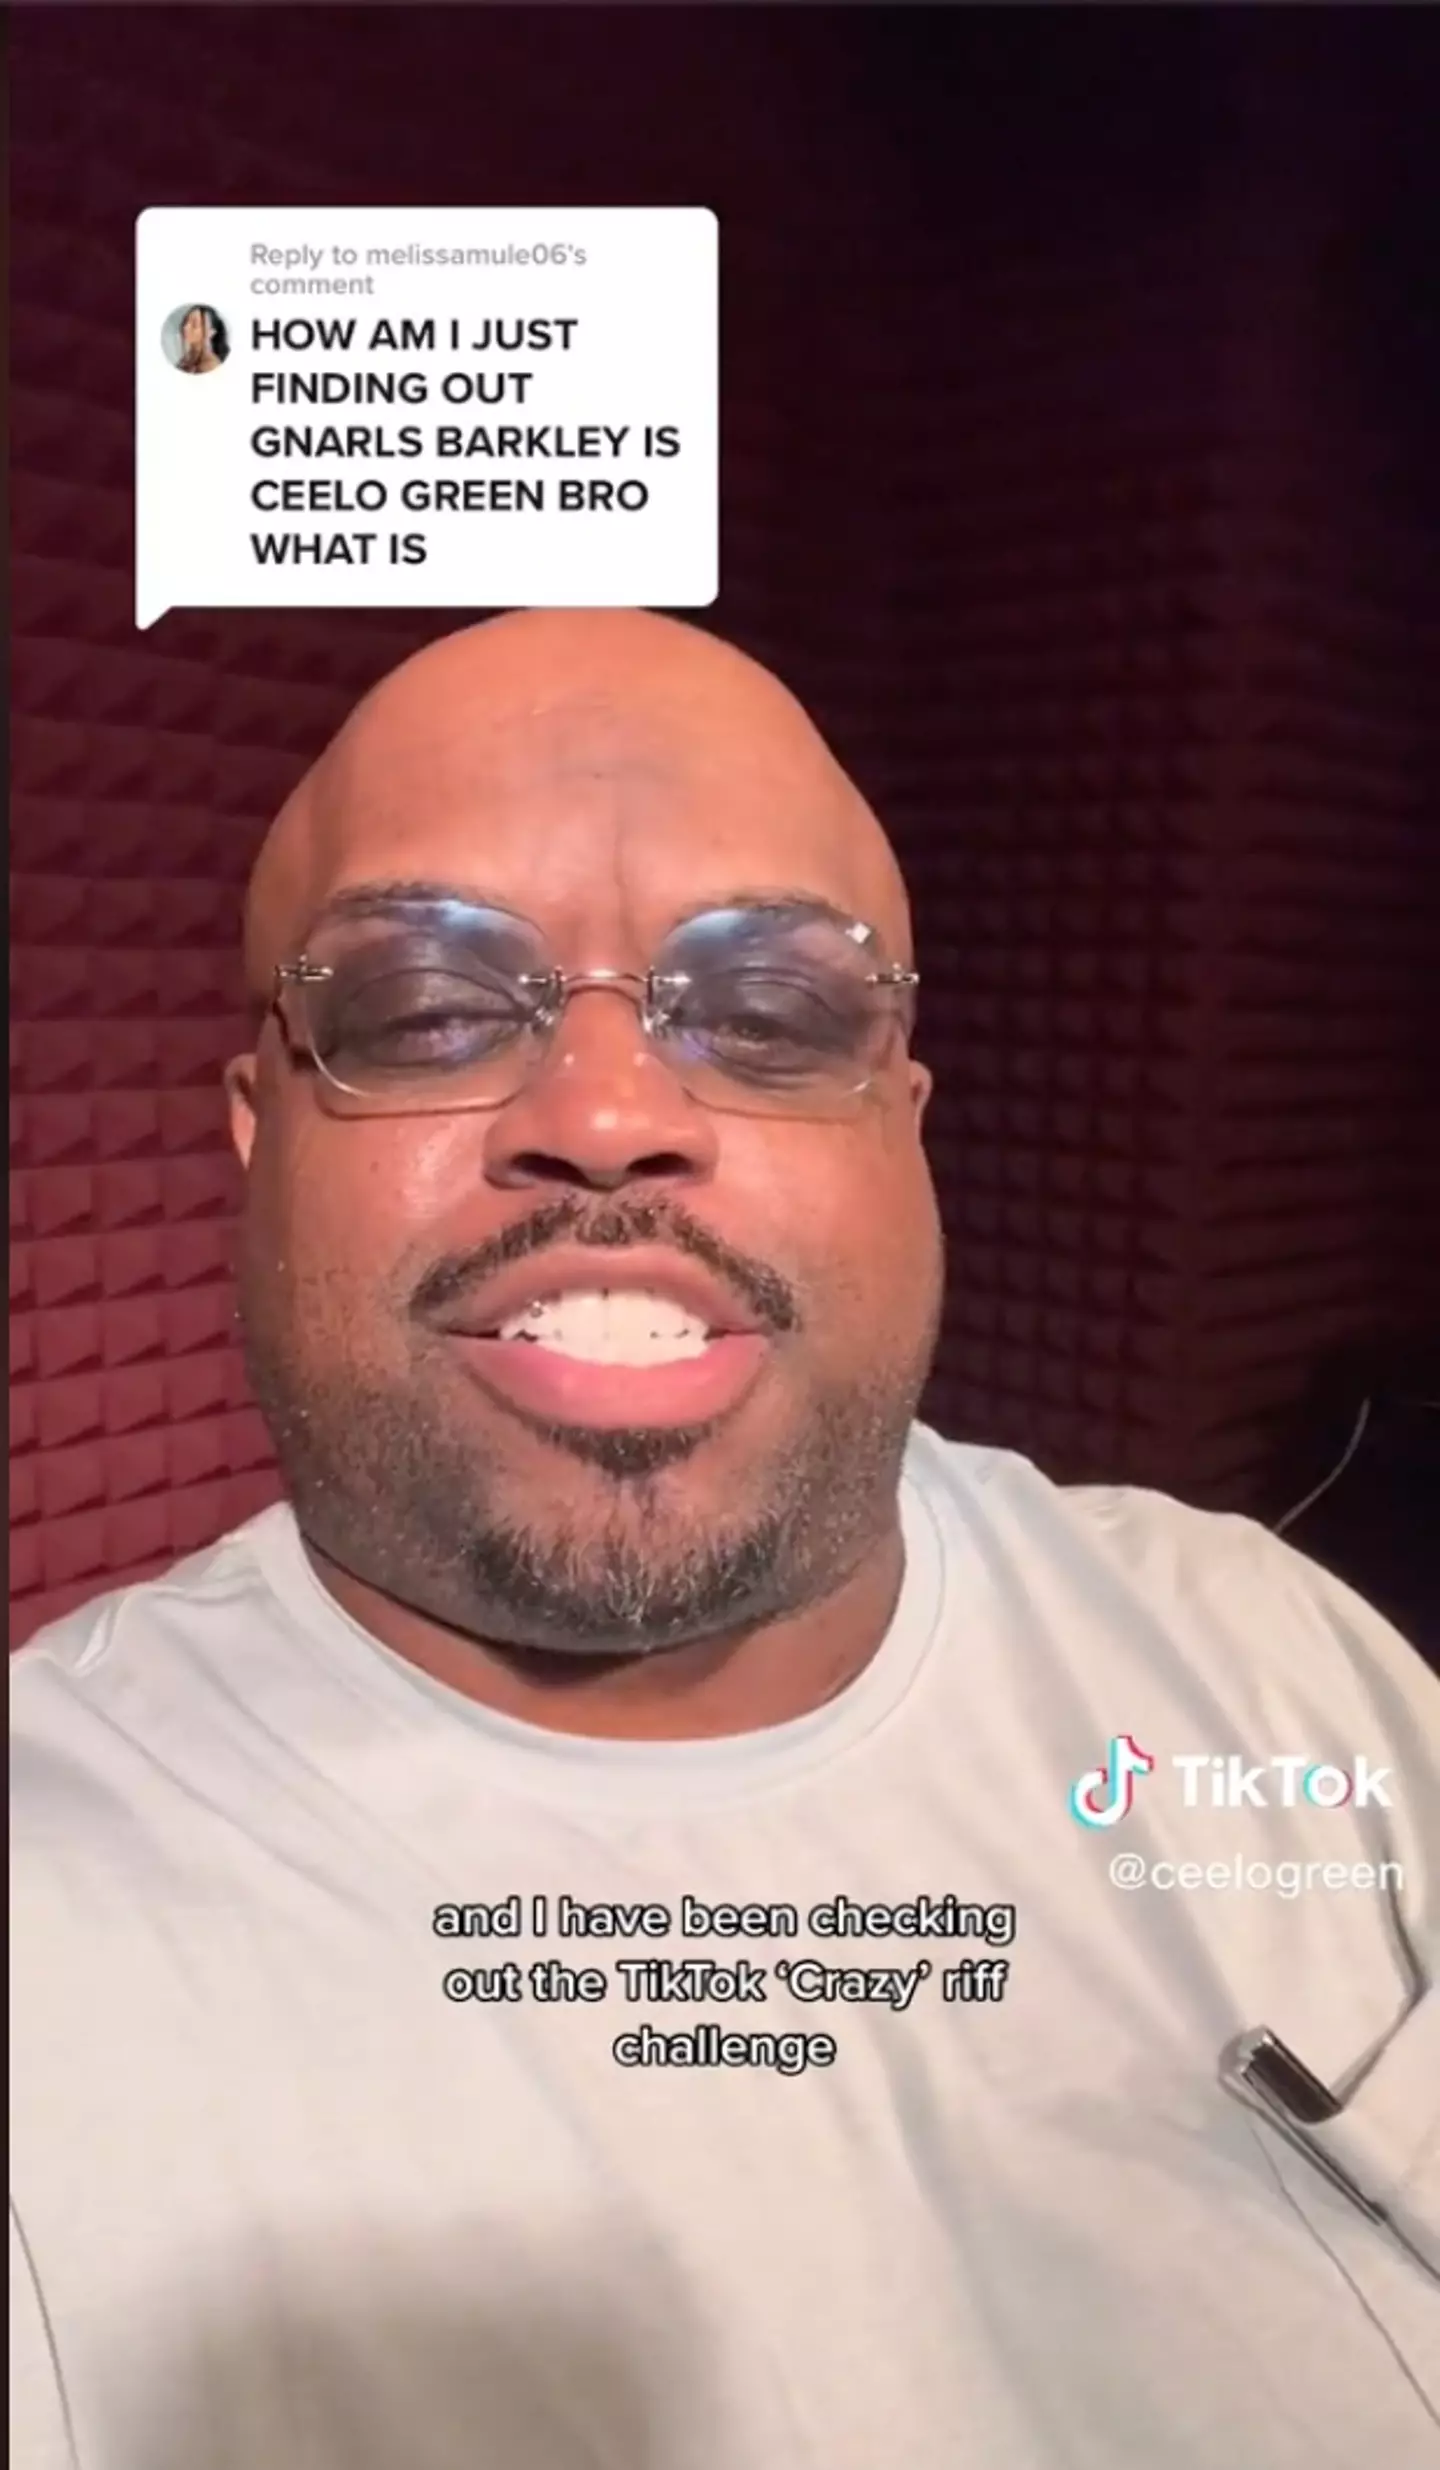 CeeLo Green jumped on TikTok to check out the 'Crazy' challenge.